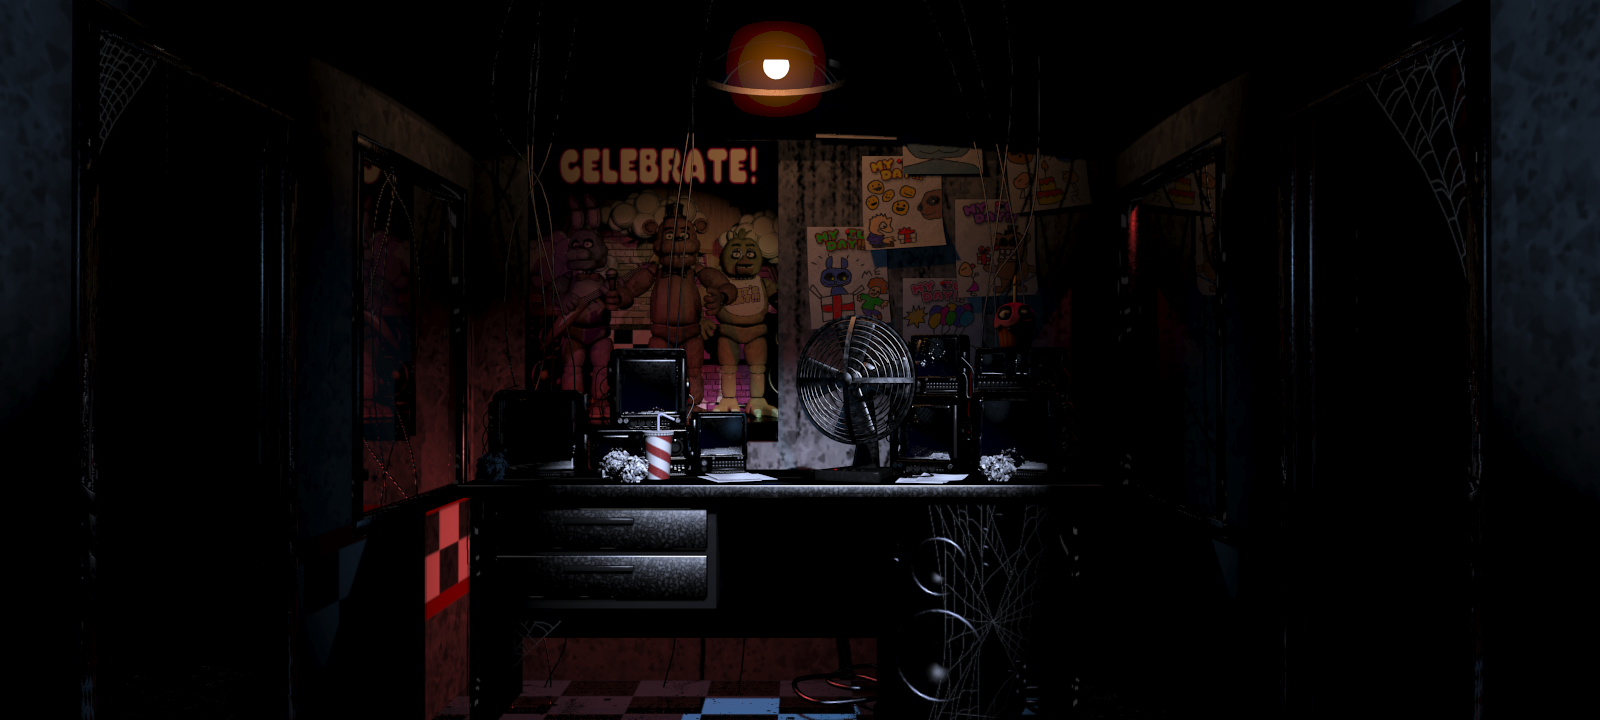 Five Nights at Freddy's (Windows) - The Cutting Room Floor